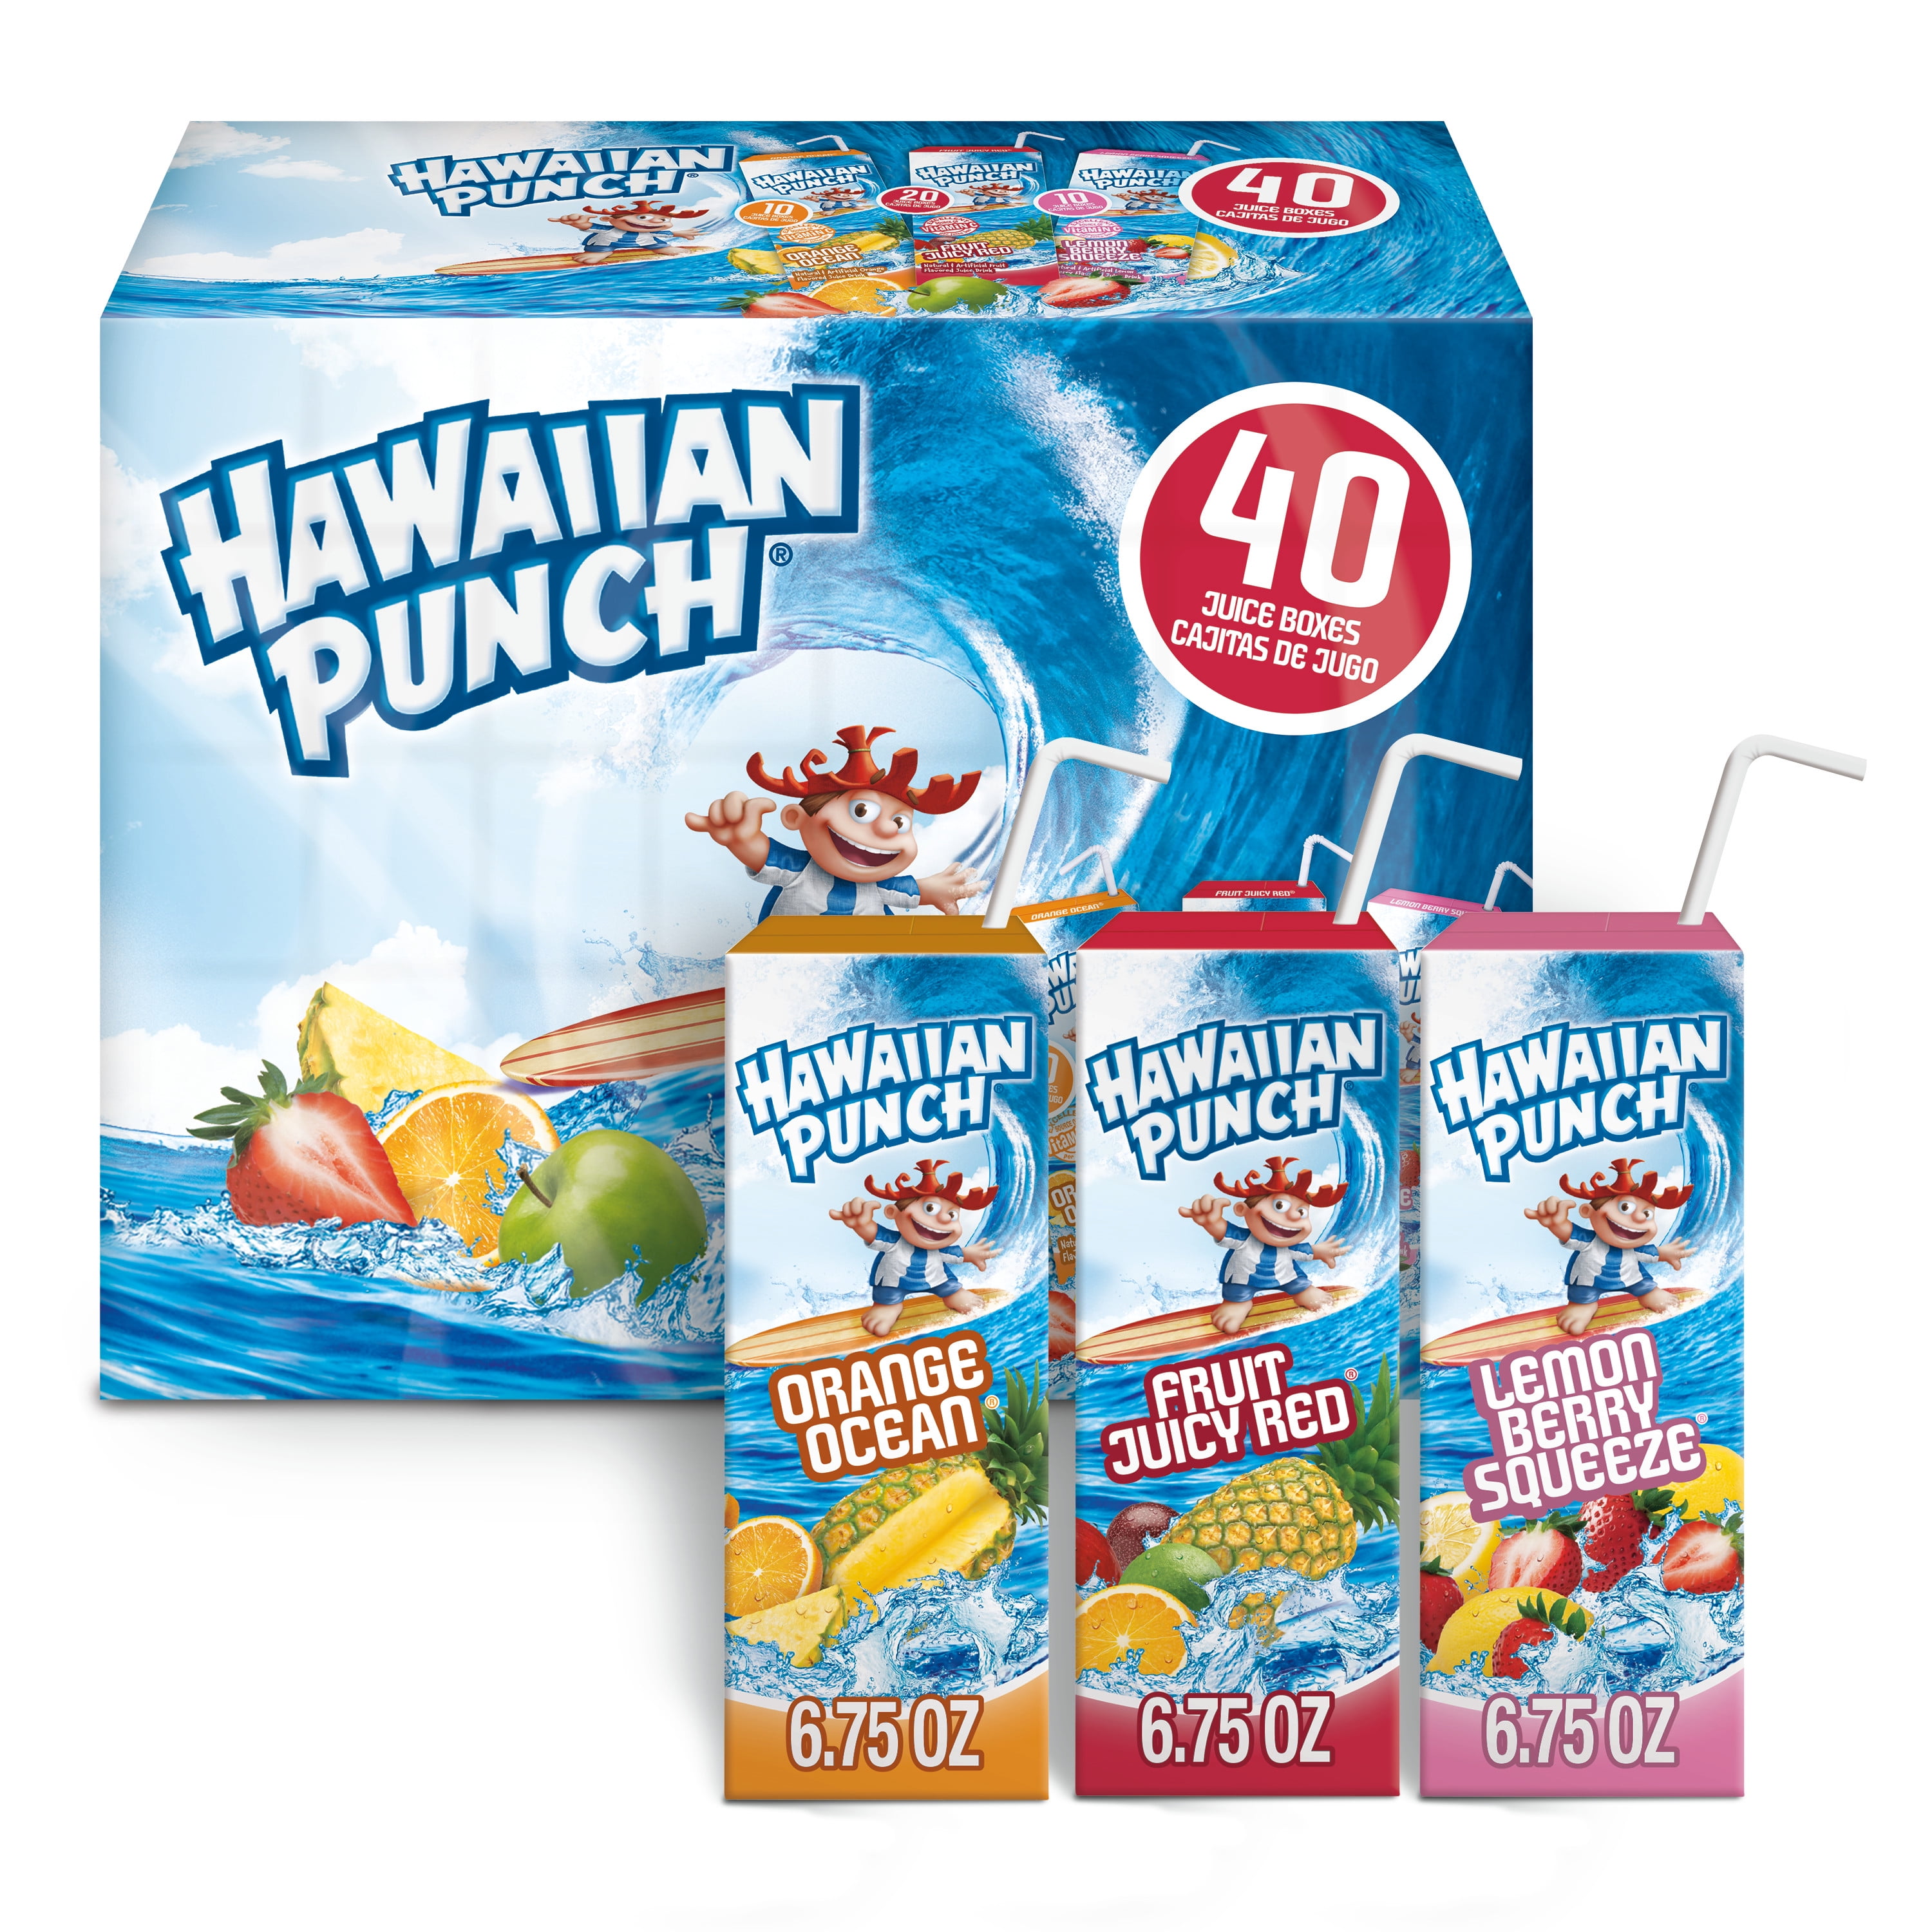 Hawaiian Punch Variety Case, 6.75 fl oz boxes, 40 pack